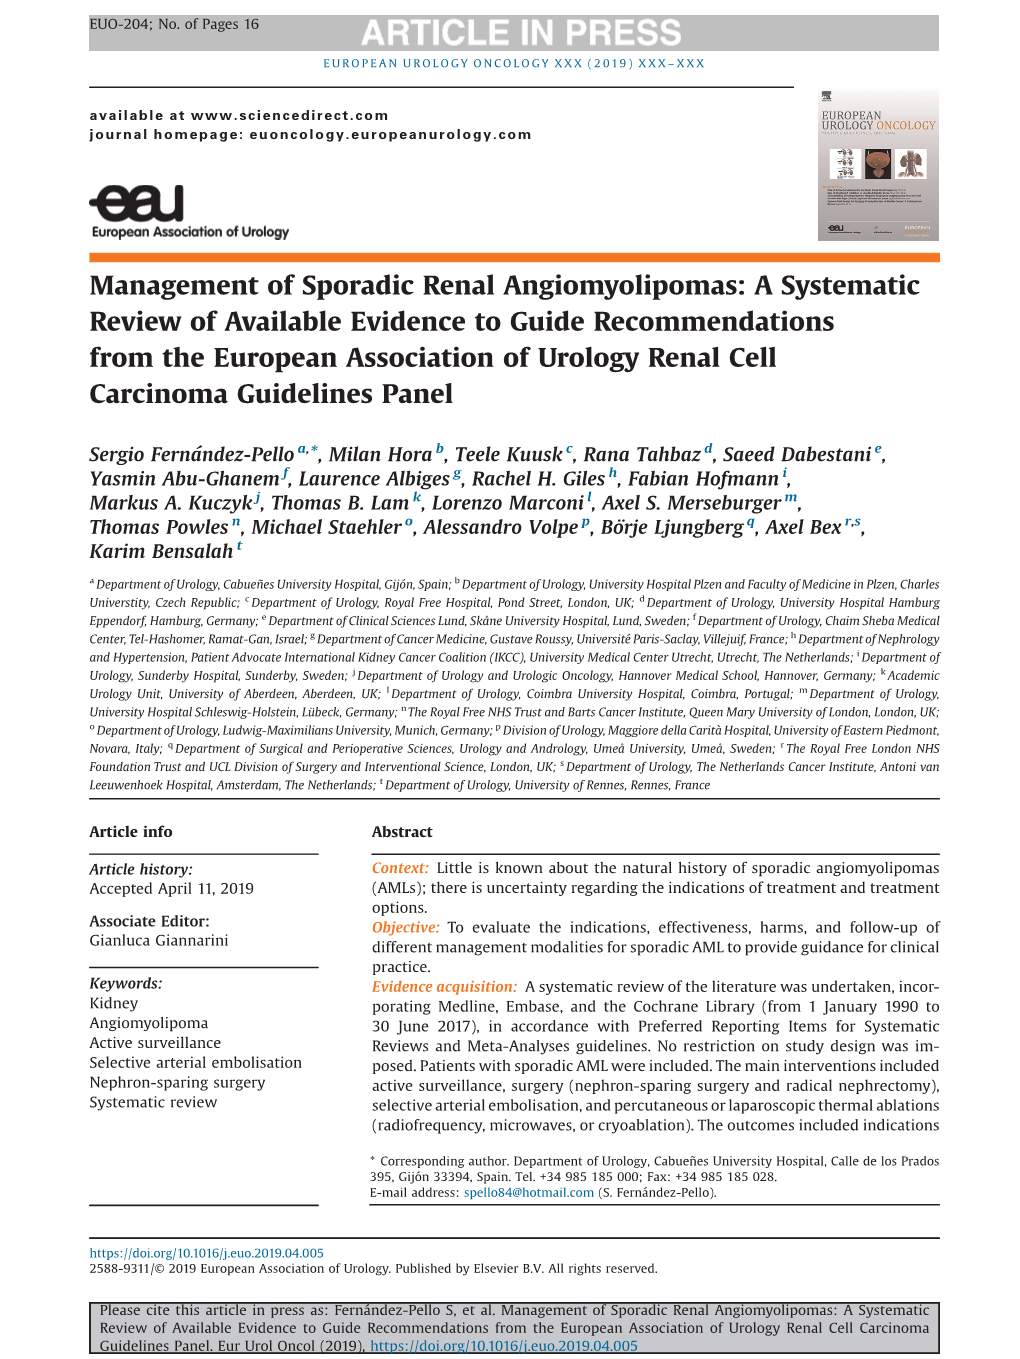 Management of Sporadic Renal Angiomyolipomas: a Systematic Review of Available Evidence to Guide Recommendations from the Europe